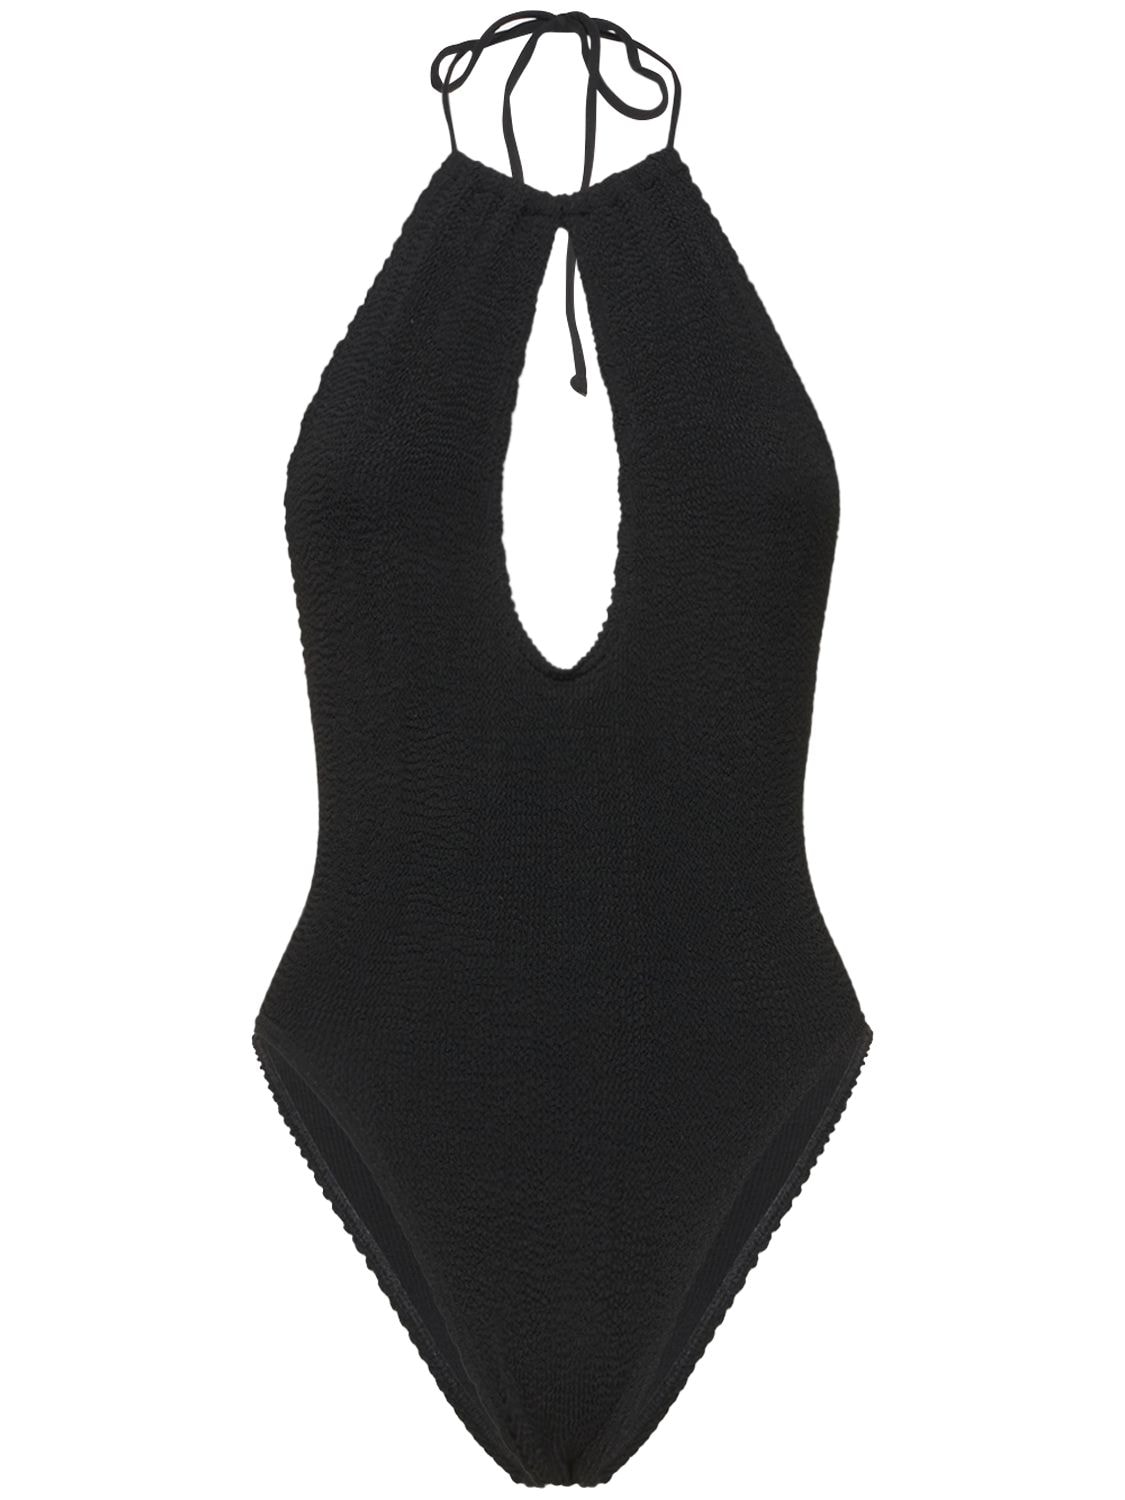 BOND EYE Bisou Cut Out One Piece Swimsuit